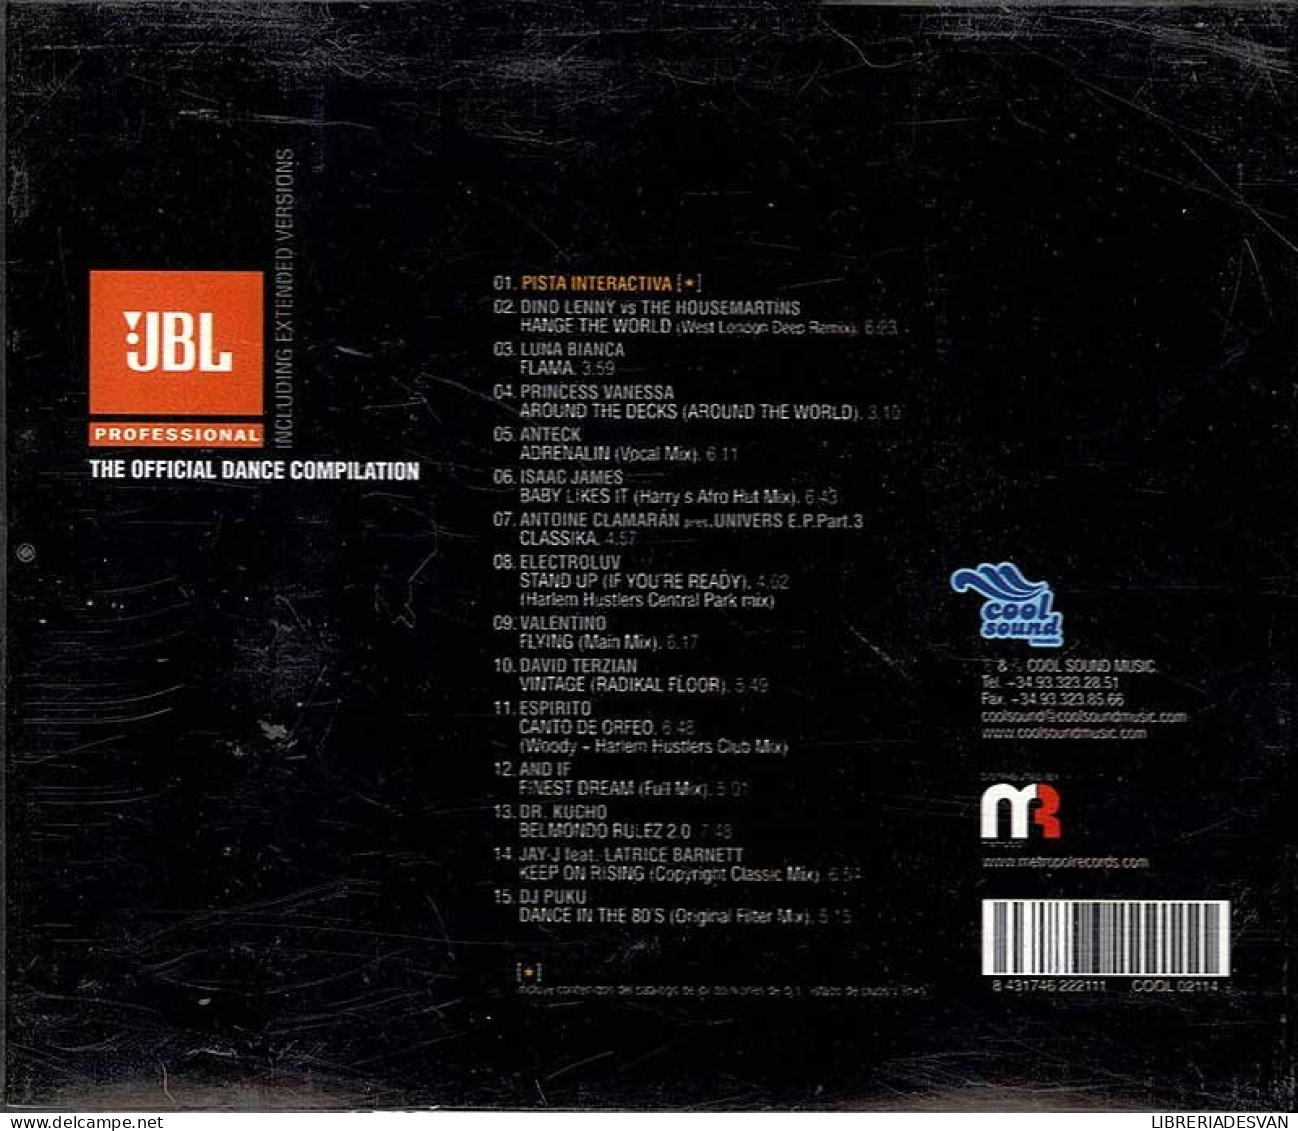 JBL Professional. The Official Dance Compilation. House. CD - Dance, Techno & House